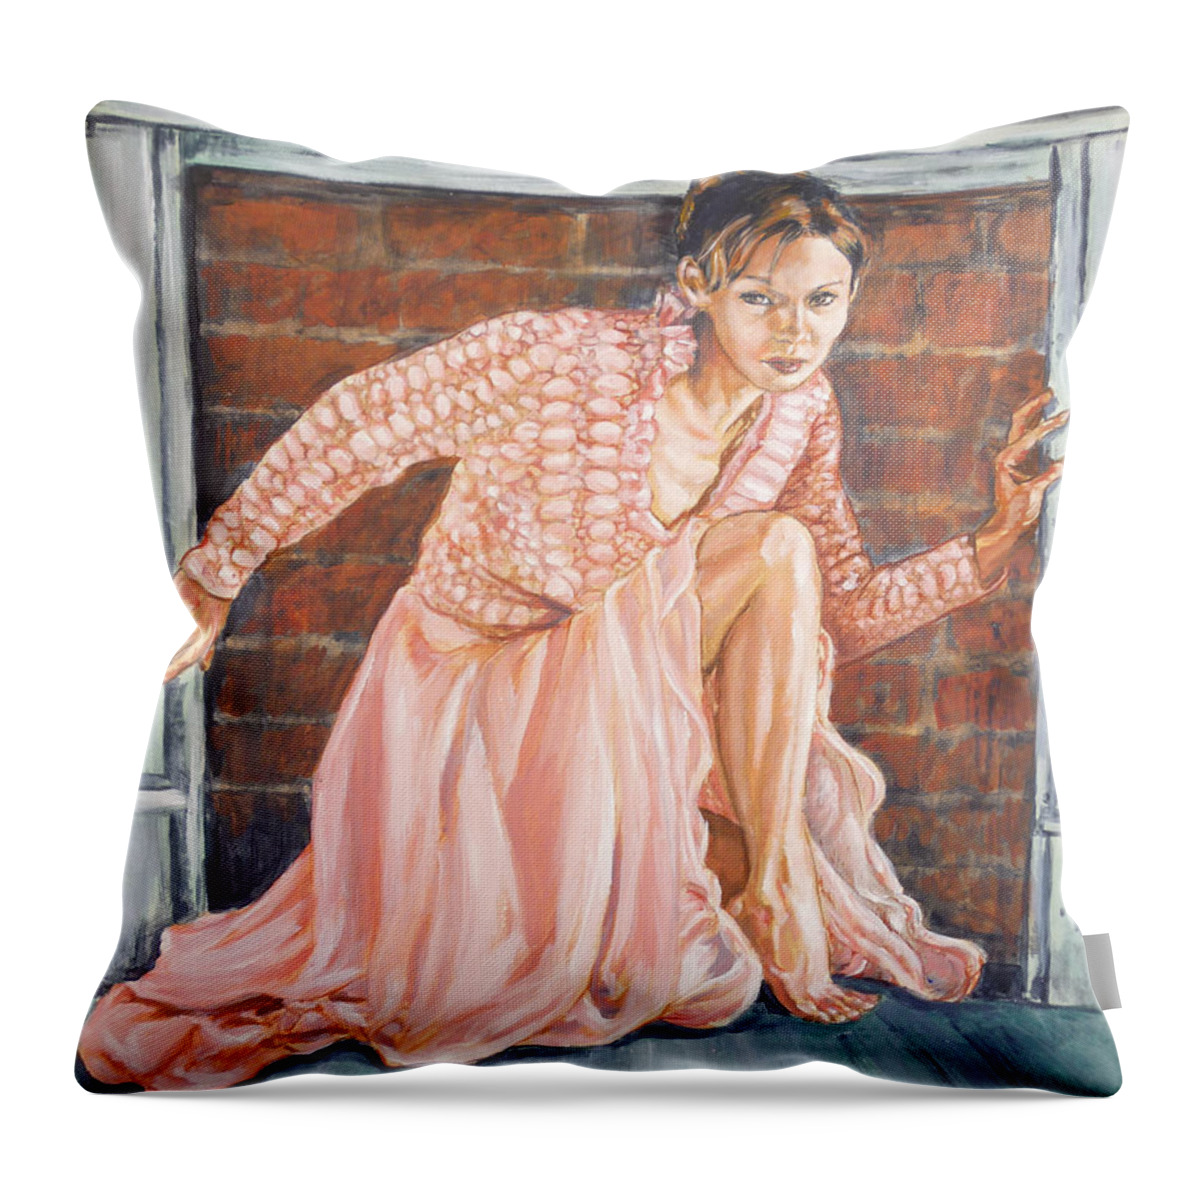 Blonde Throw Pillow featuring the painting Secret Passage by Bryan Bustard